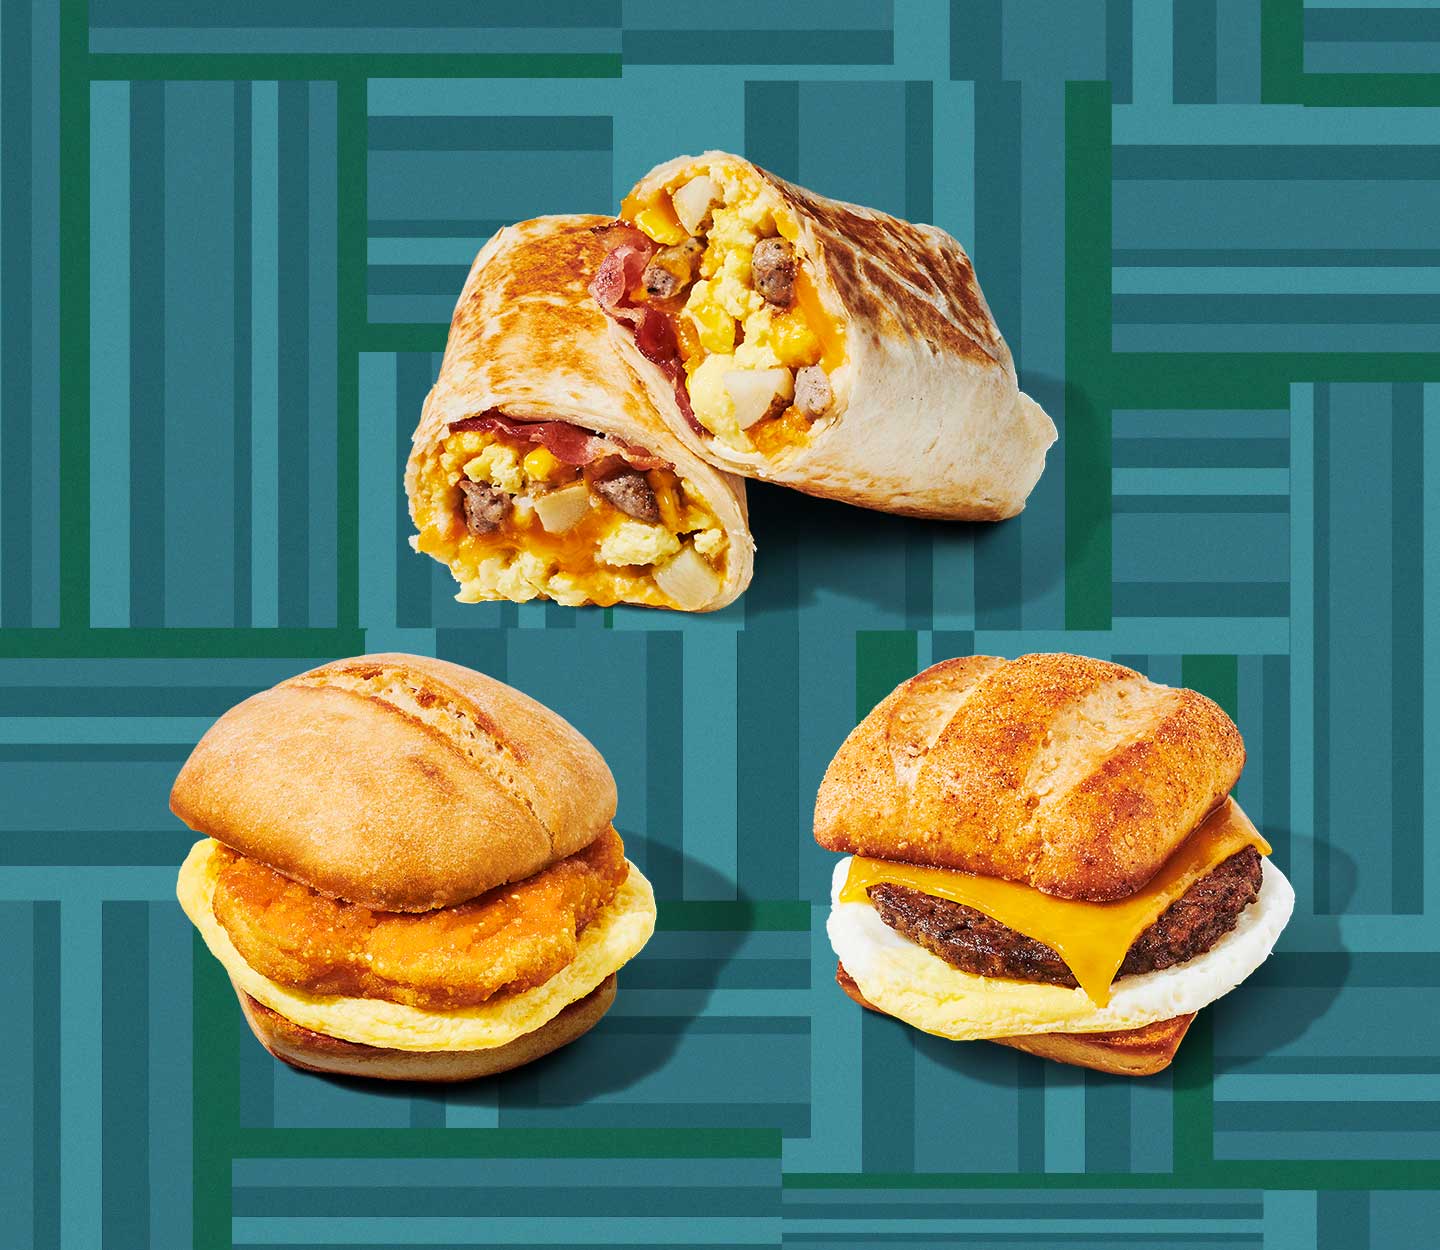 A cut and stacked breakfast wrap, chicken breakfast sandwich and meatless breakfast sandwich arranged in a triangle shape.